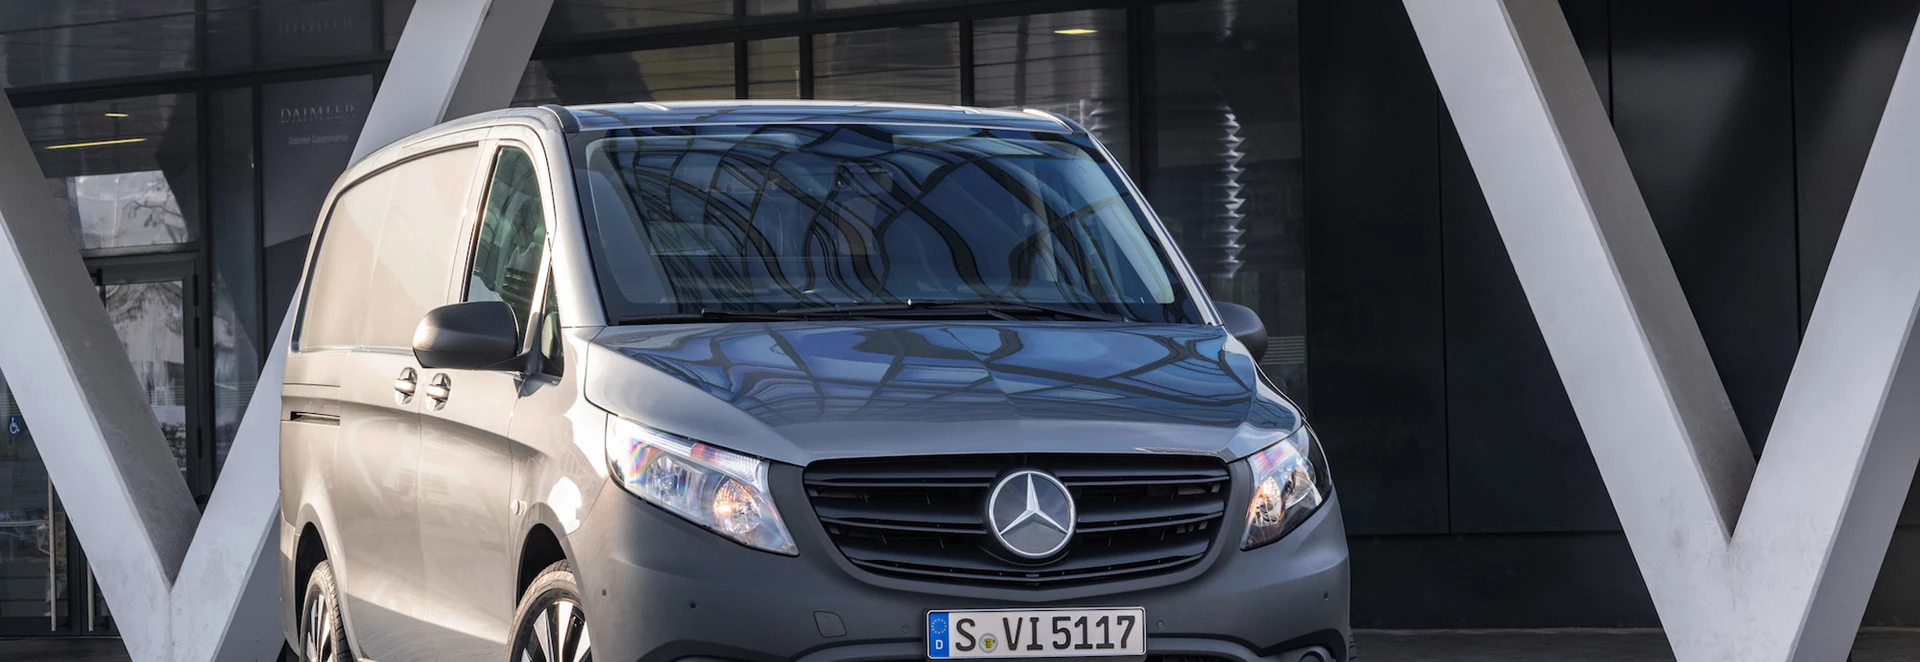 2020 Mercedes-Benz Vito revealed with upgraded electric version on offer